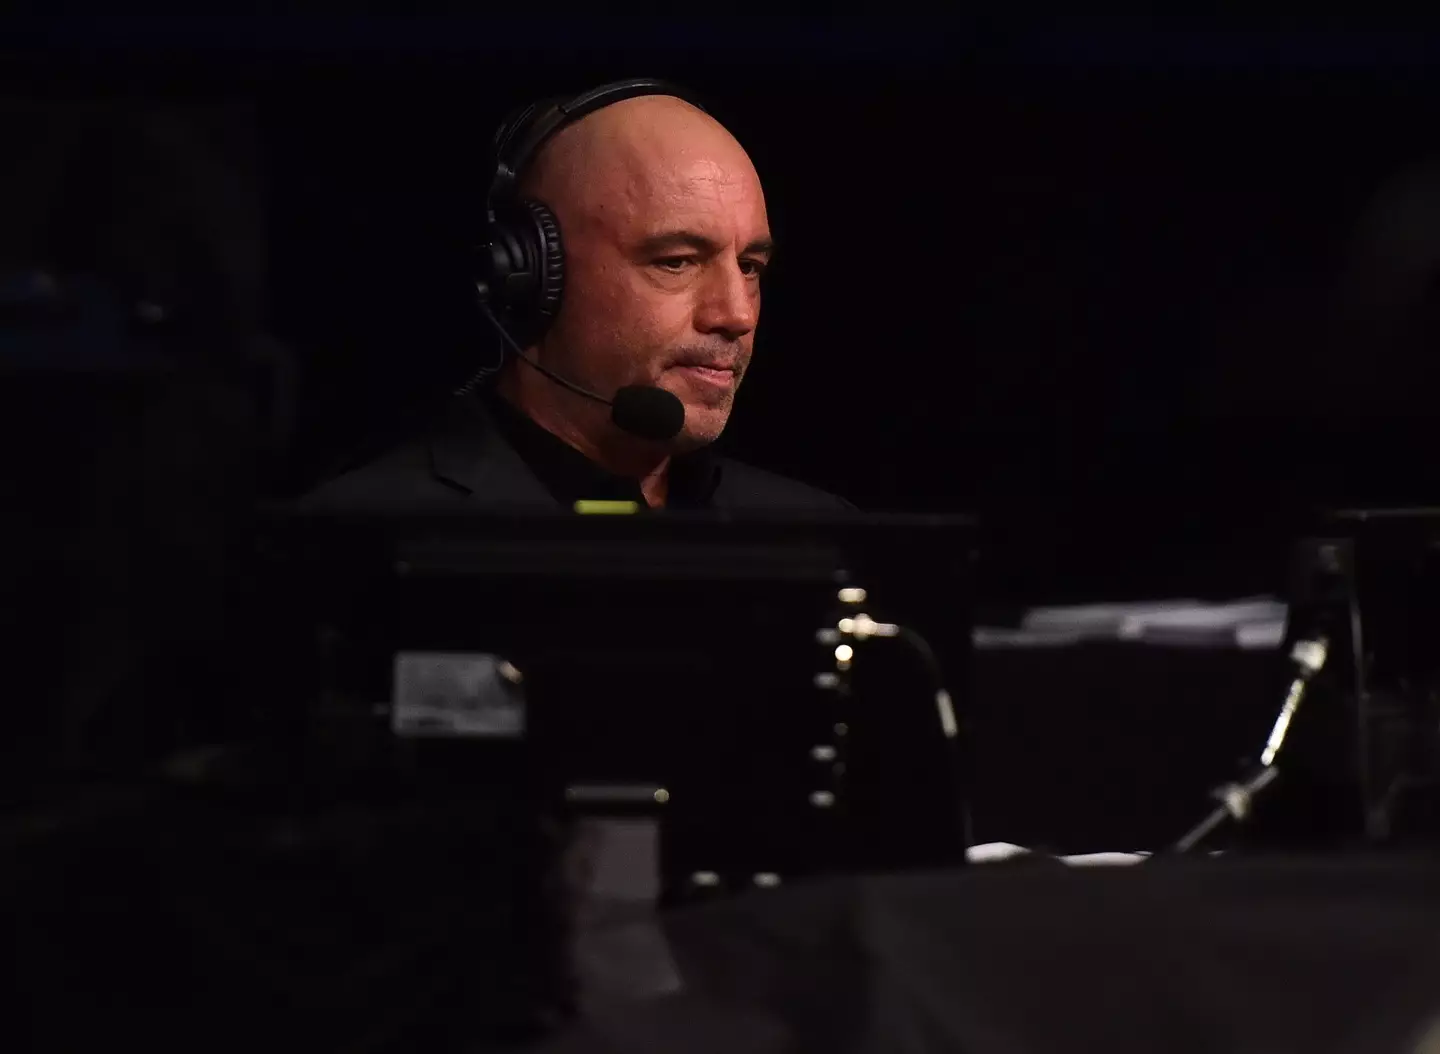 Rogan's podcast has attracted controversy in the past.